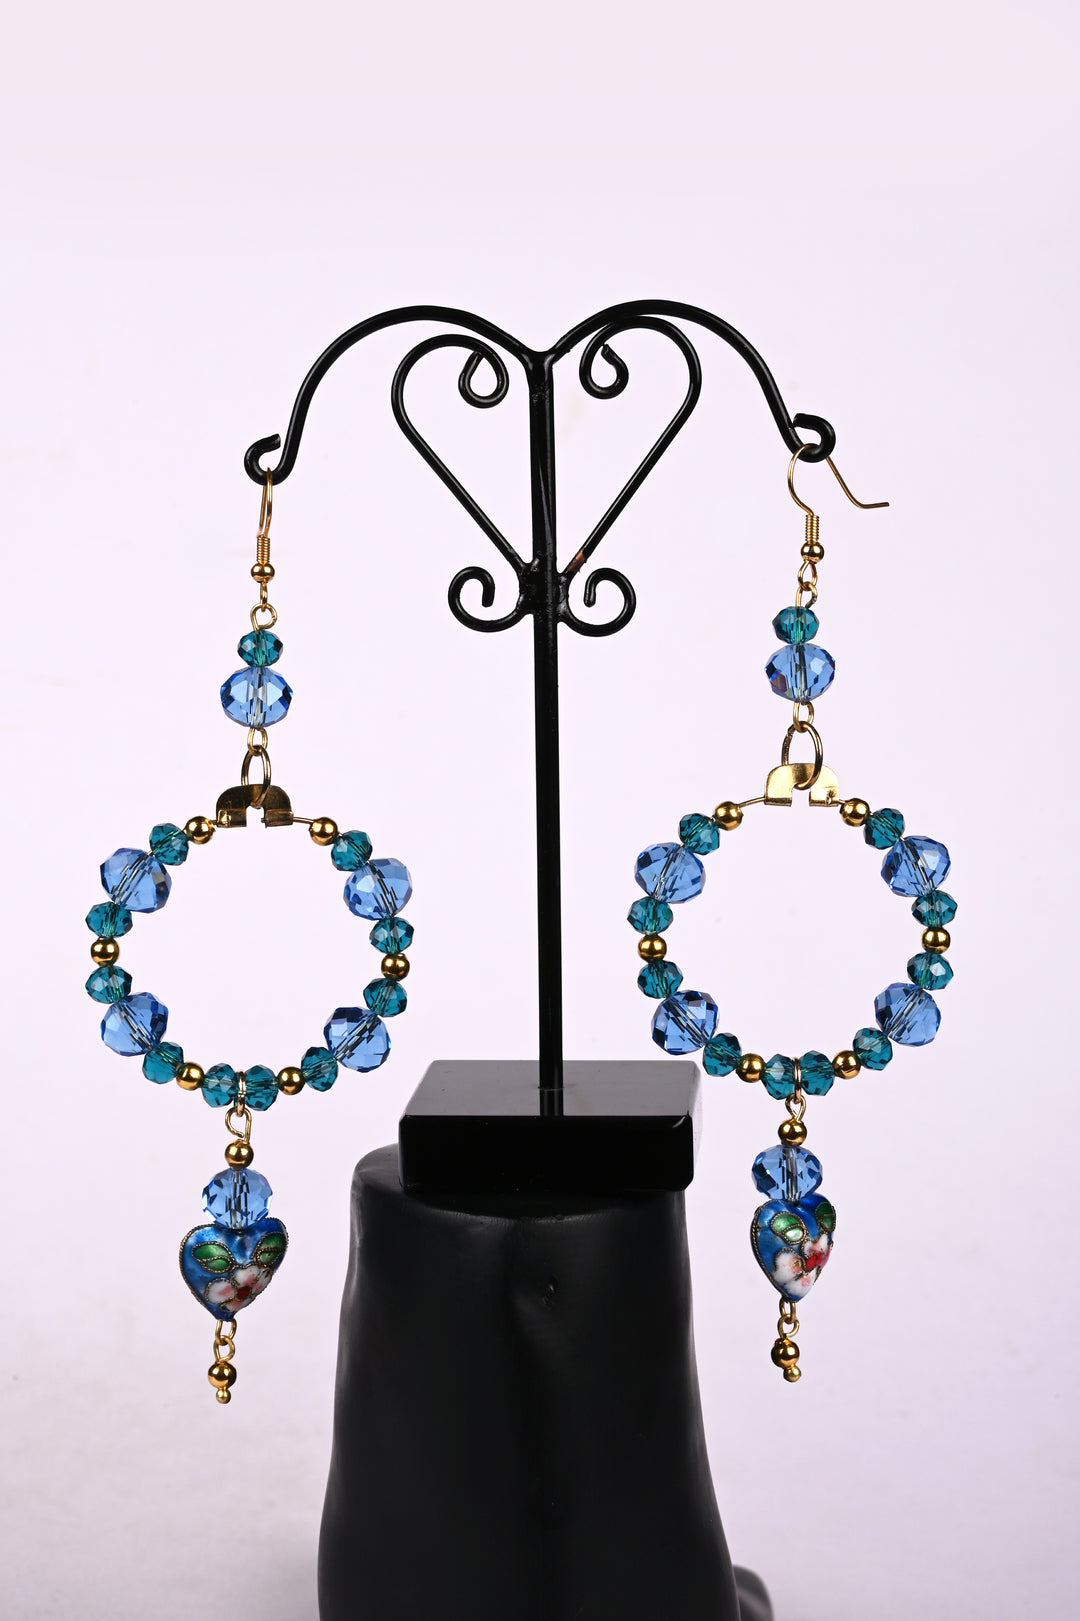 Multi Faceted Glass Beads Earring Strung In Metal Hoop & Styled With Heart Shaped Beads